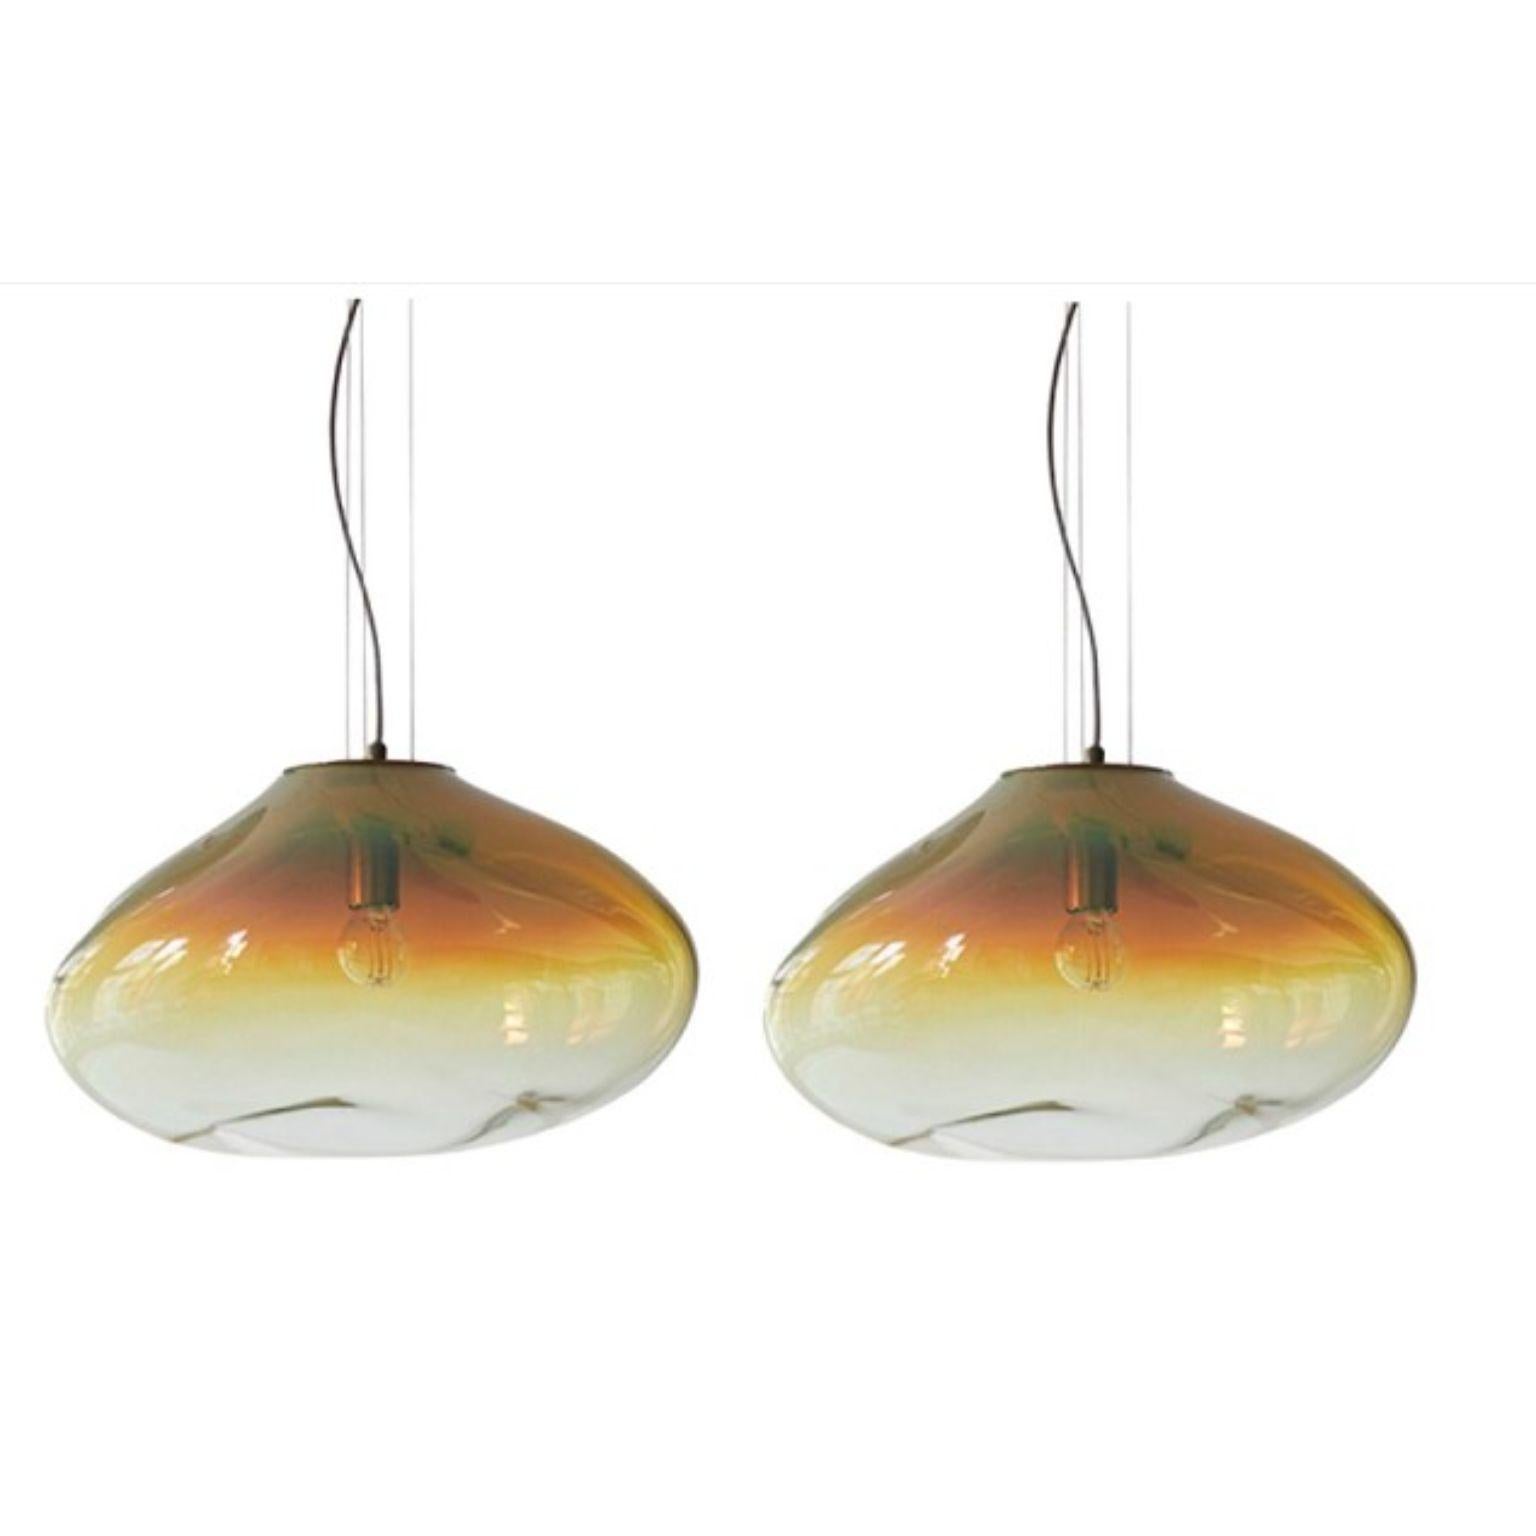 Set of 2 haumea amorph amber iridescent L pendants by Eloa.
No UL listed 
Material: glass, steel, silver, LED bulb.
Dimensions: D27 x W39 x H30 cm
Also available in different colours and dimensions.

All our lamps can be wired according to each